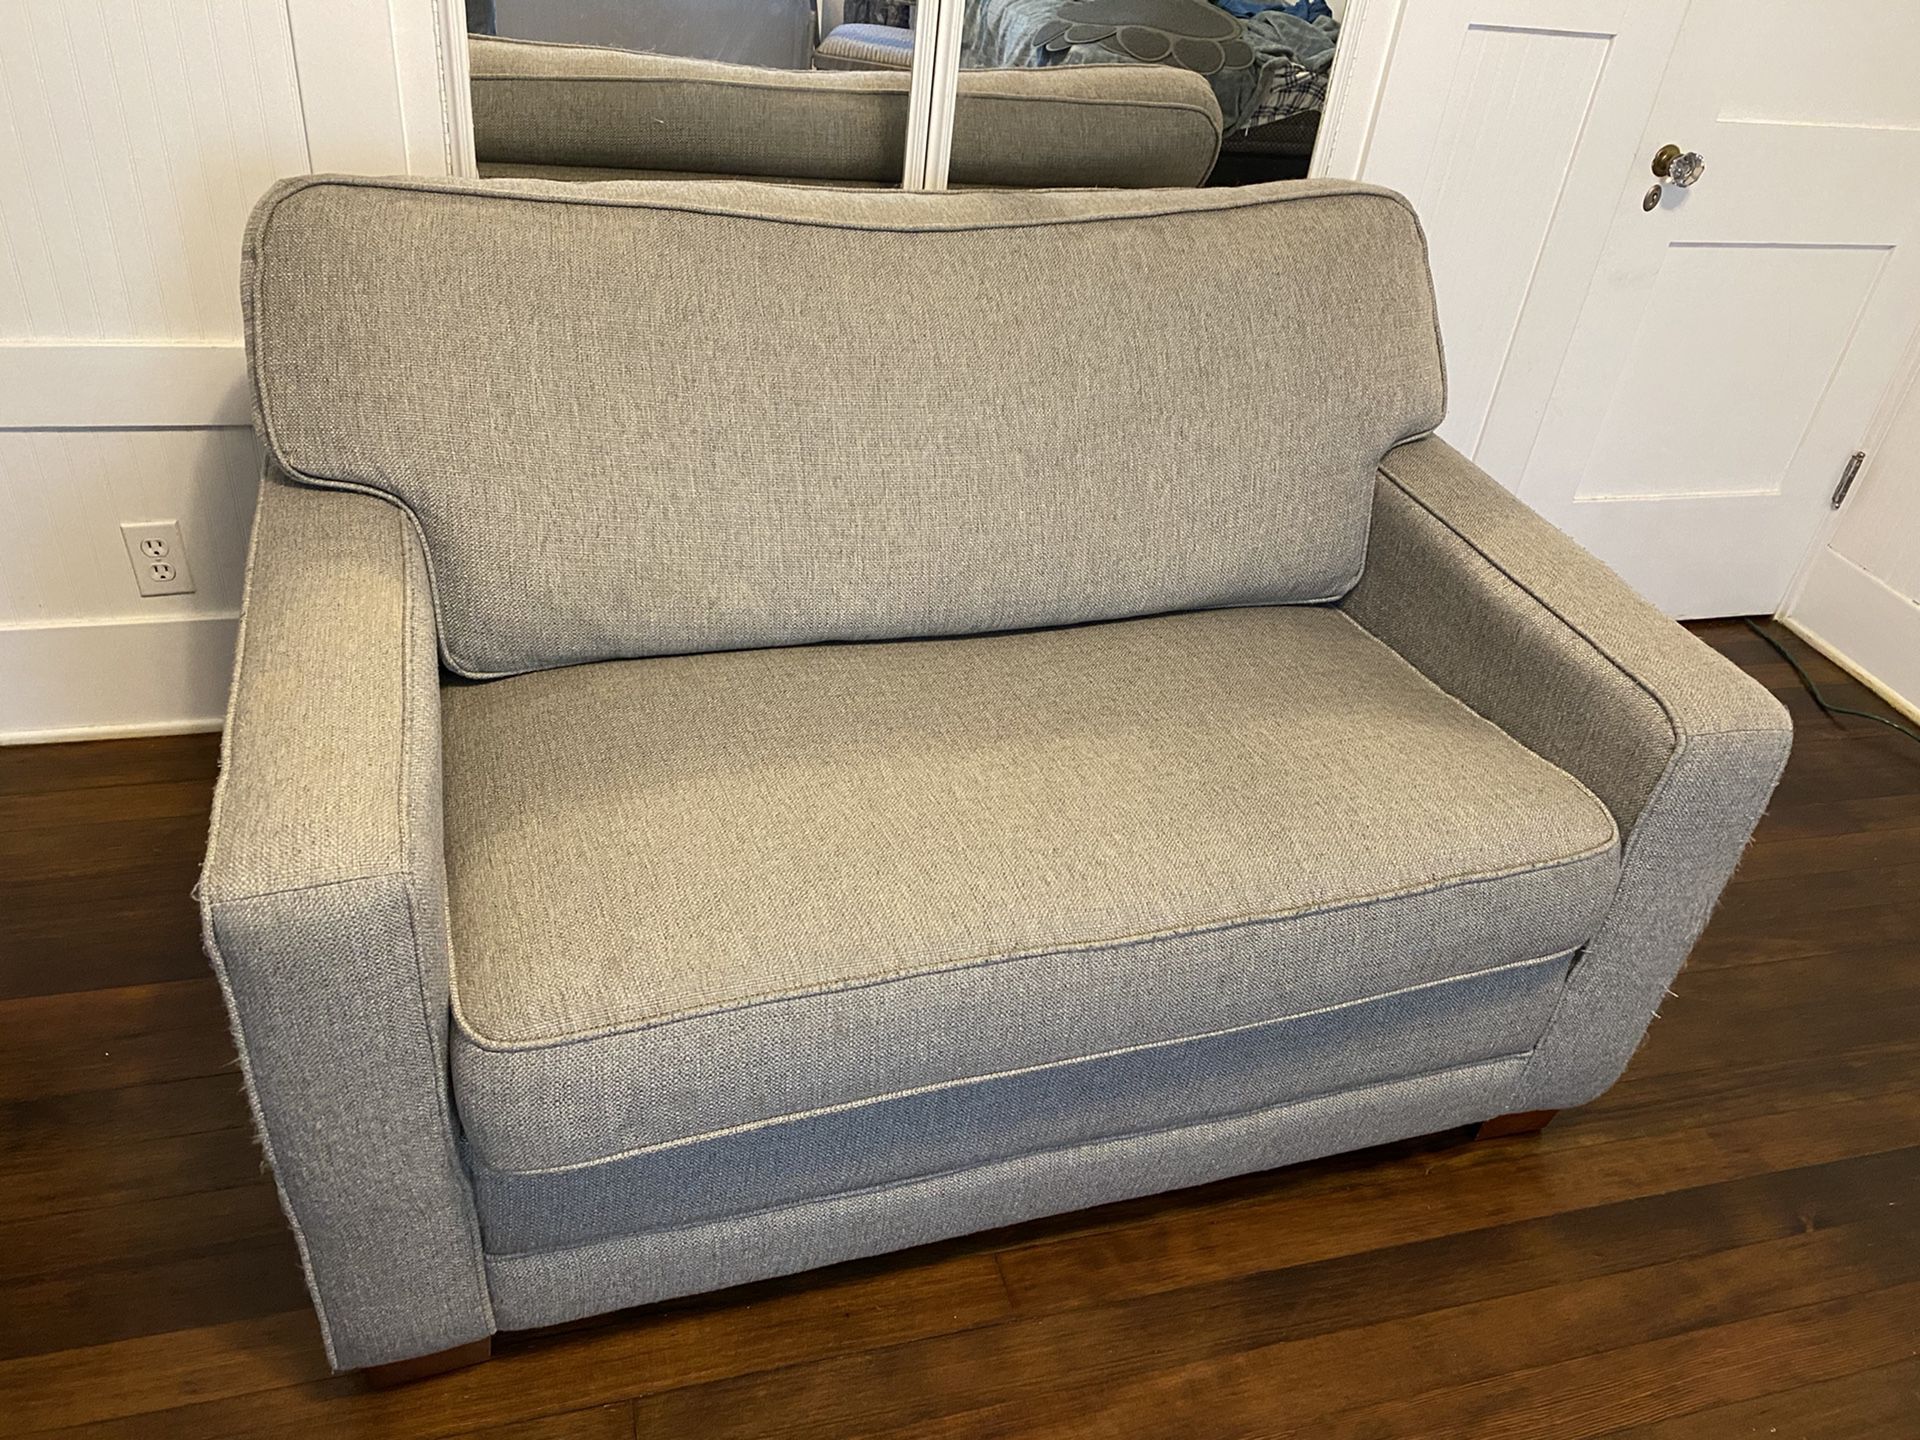 Couch bed love seat folding from Costco